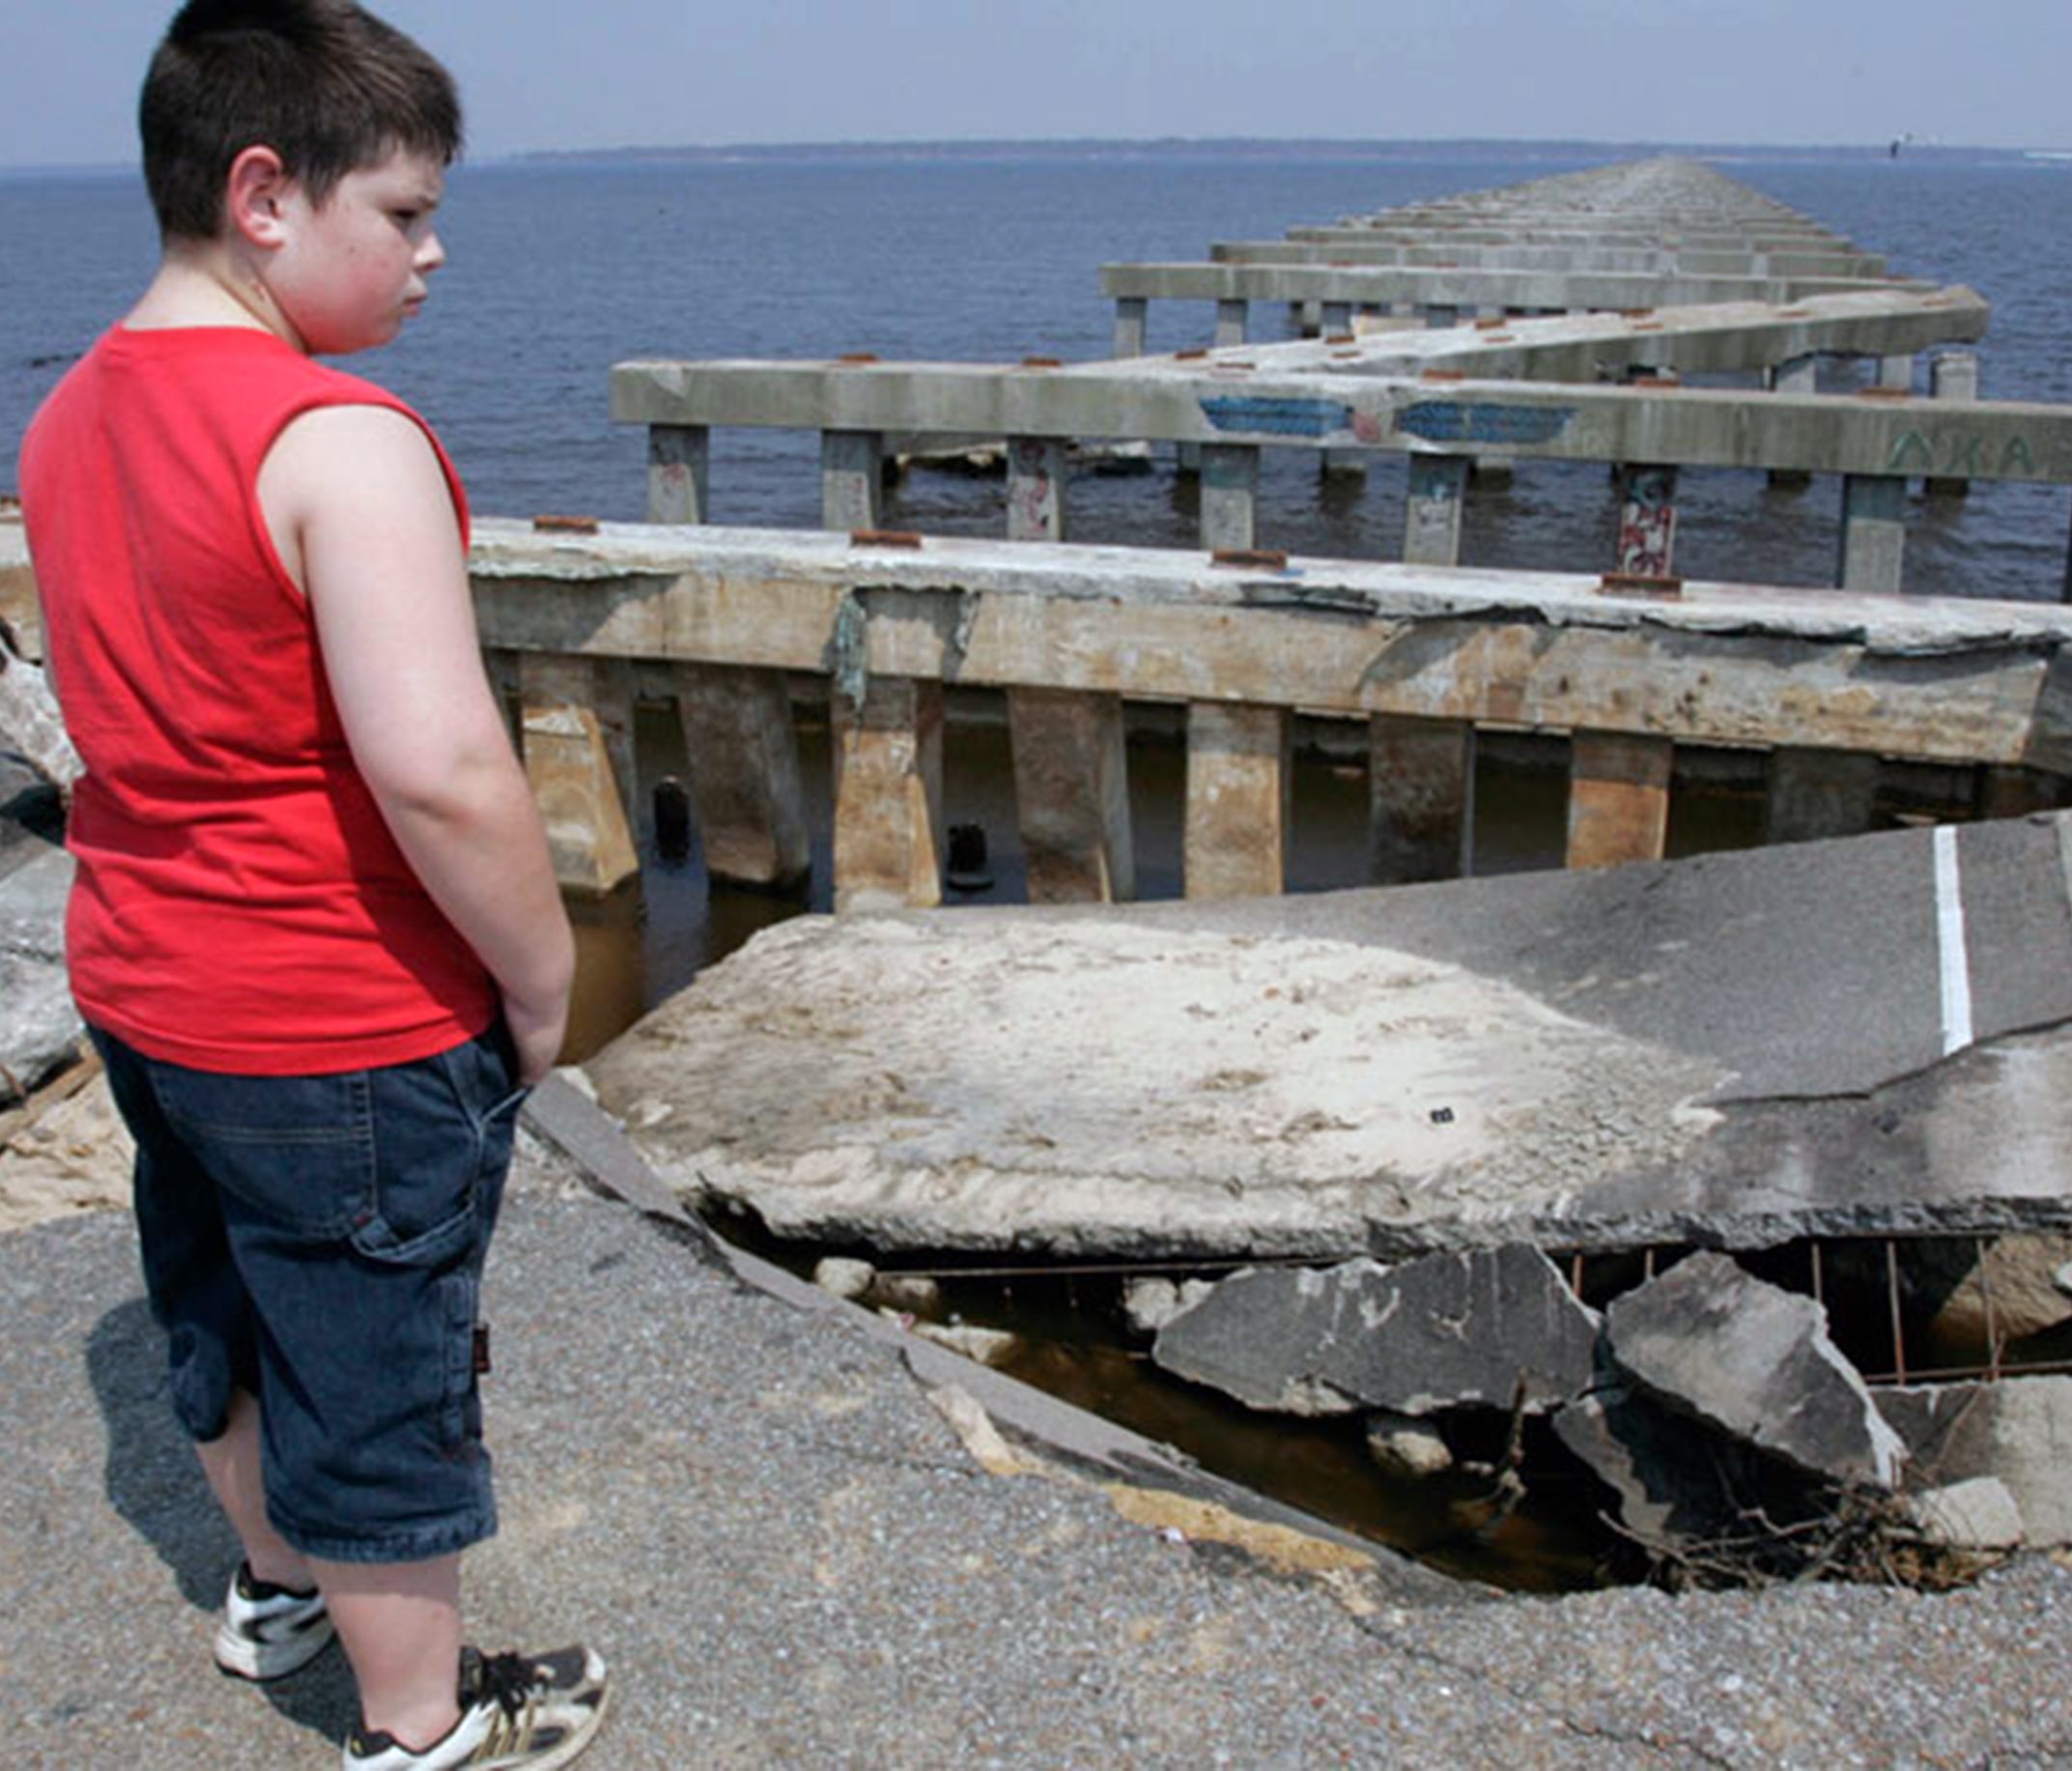 Mike Garvin, 11, of Baton Rouge, La., looks Sept. 4, 2005, at the ruins of the U.S. 90 bridge over Bay St. Louis, destroyed in Hurricane Katrina.